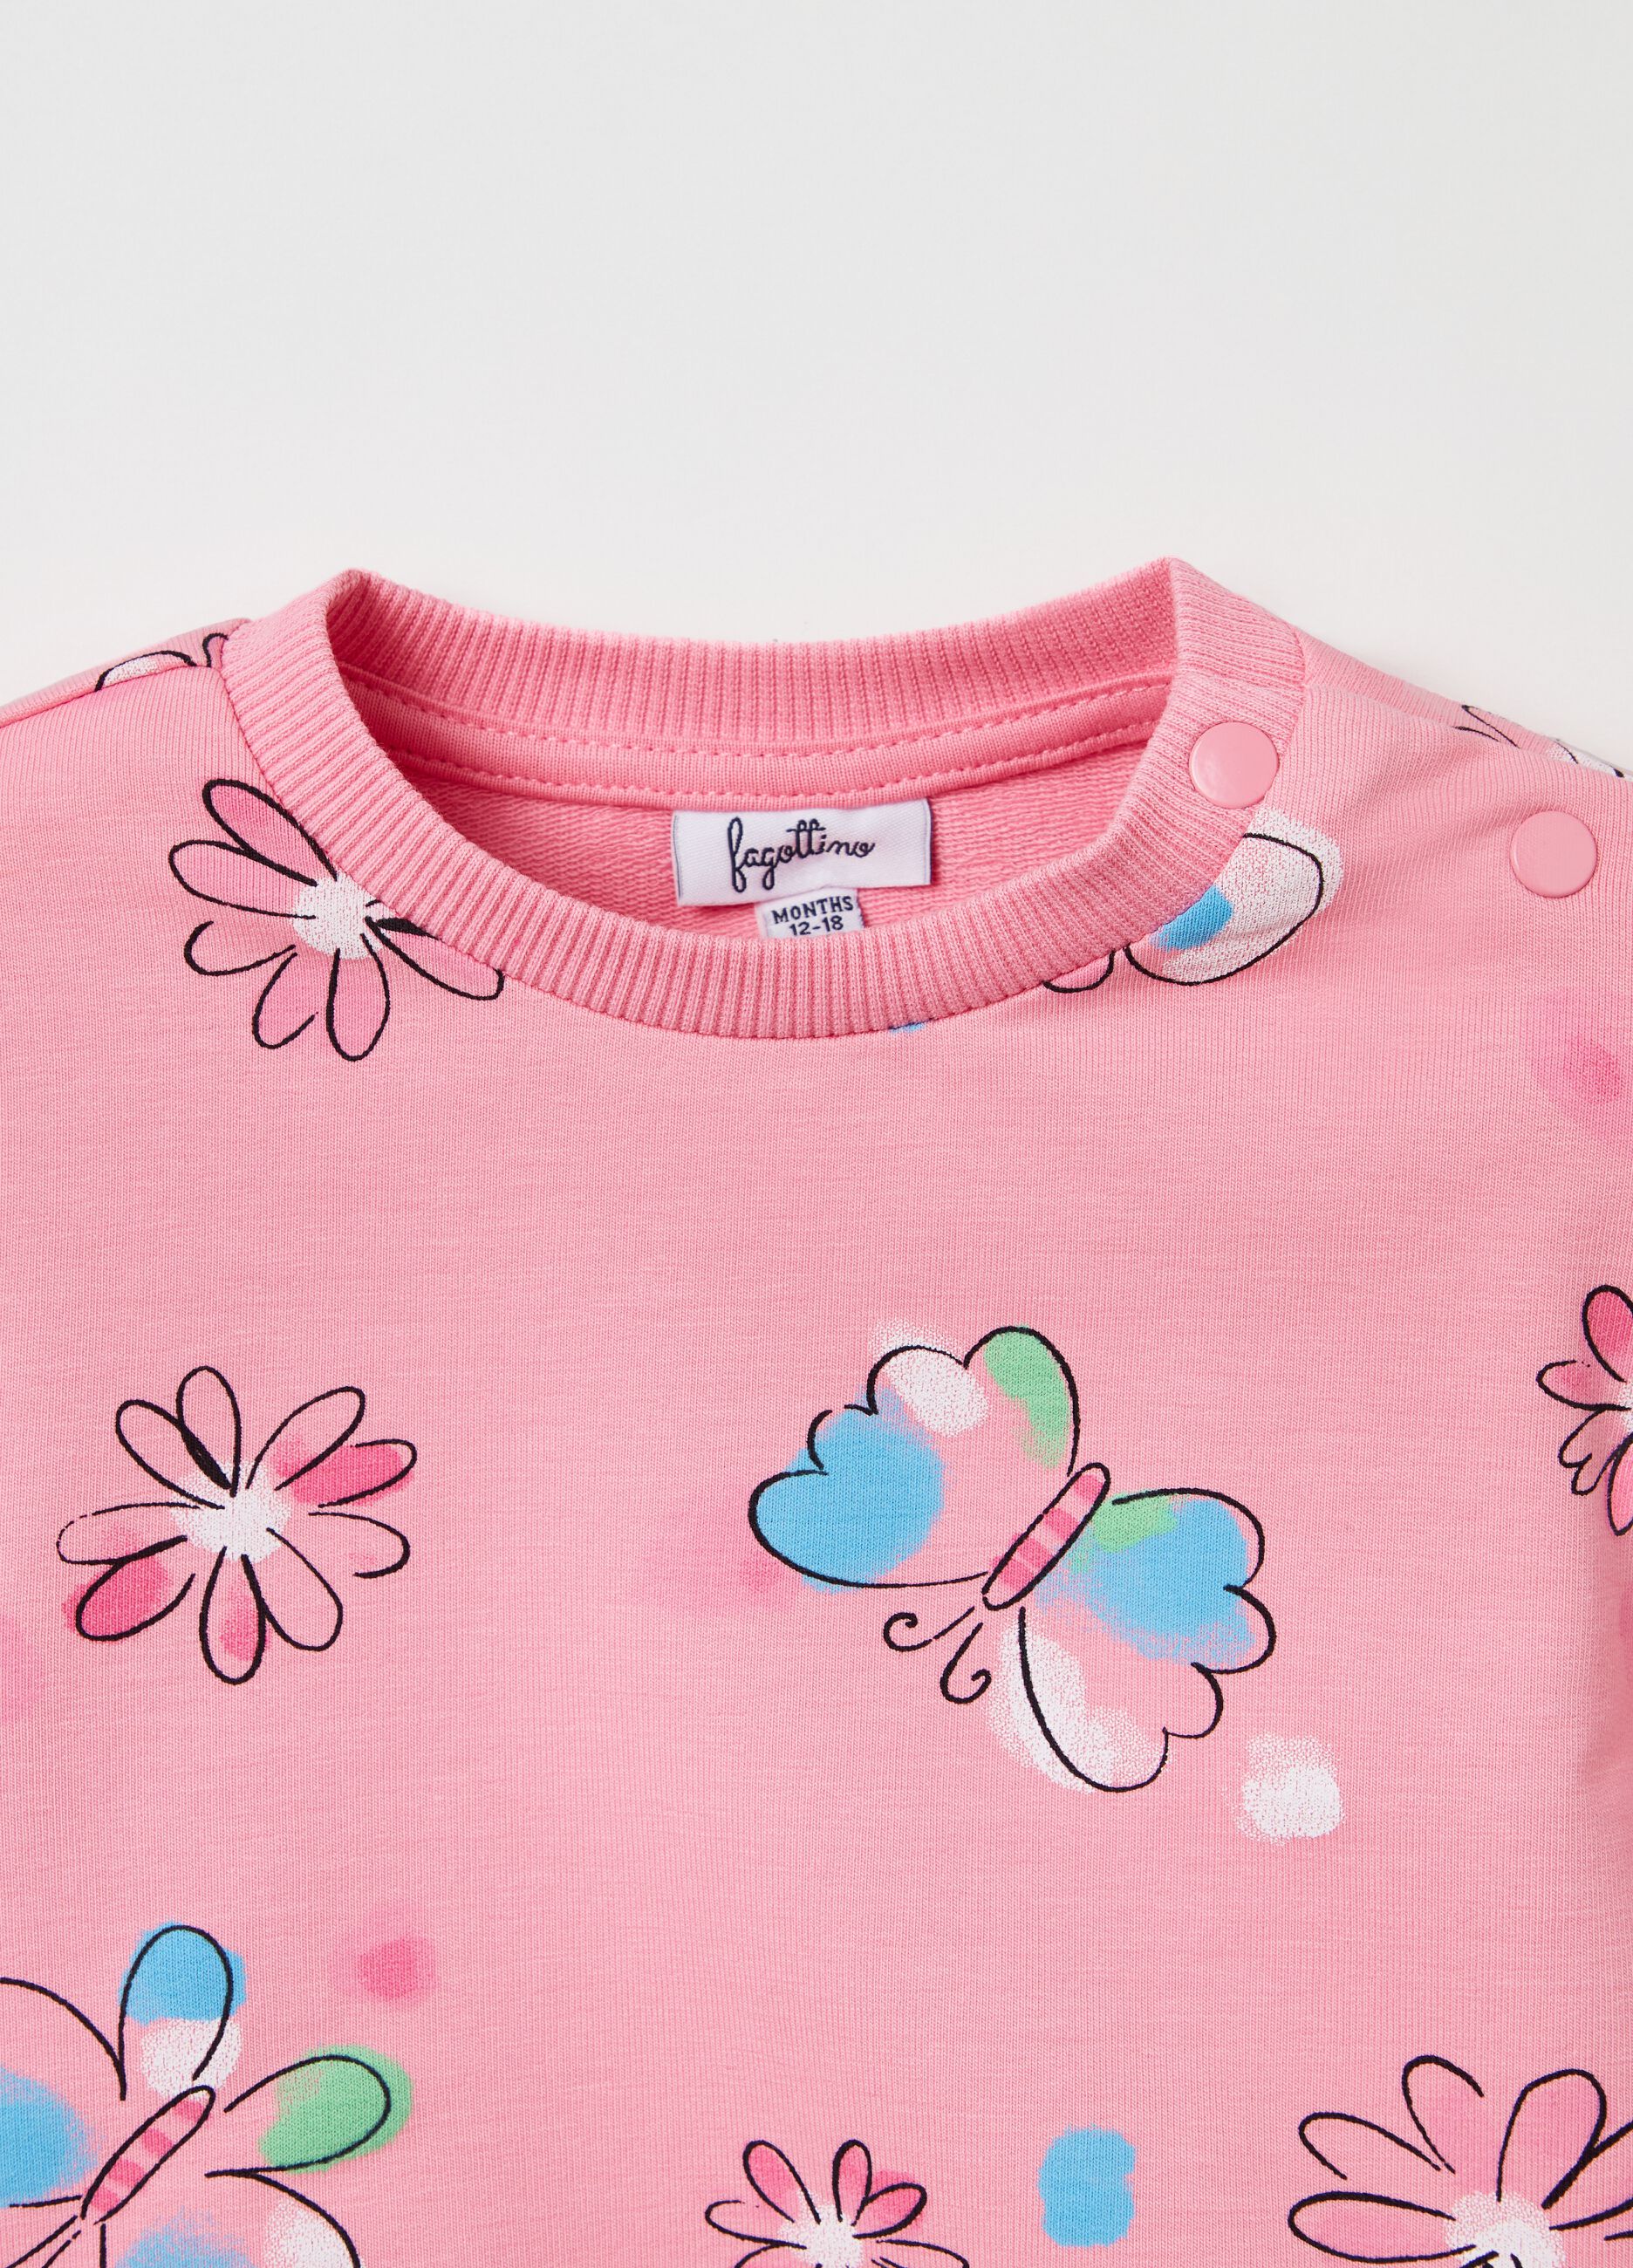 French terry sweatshirt with butterfly print